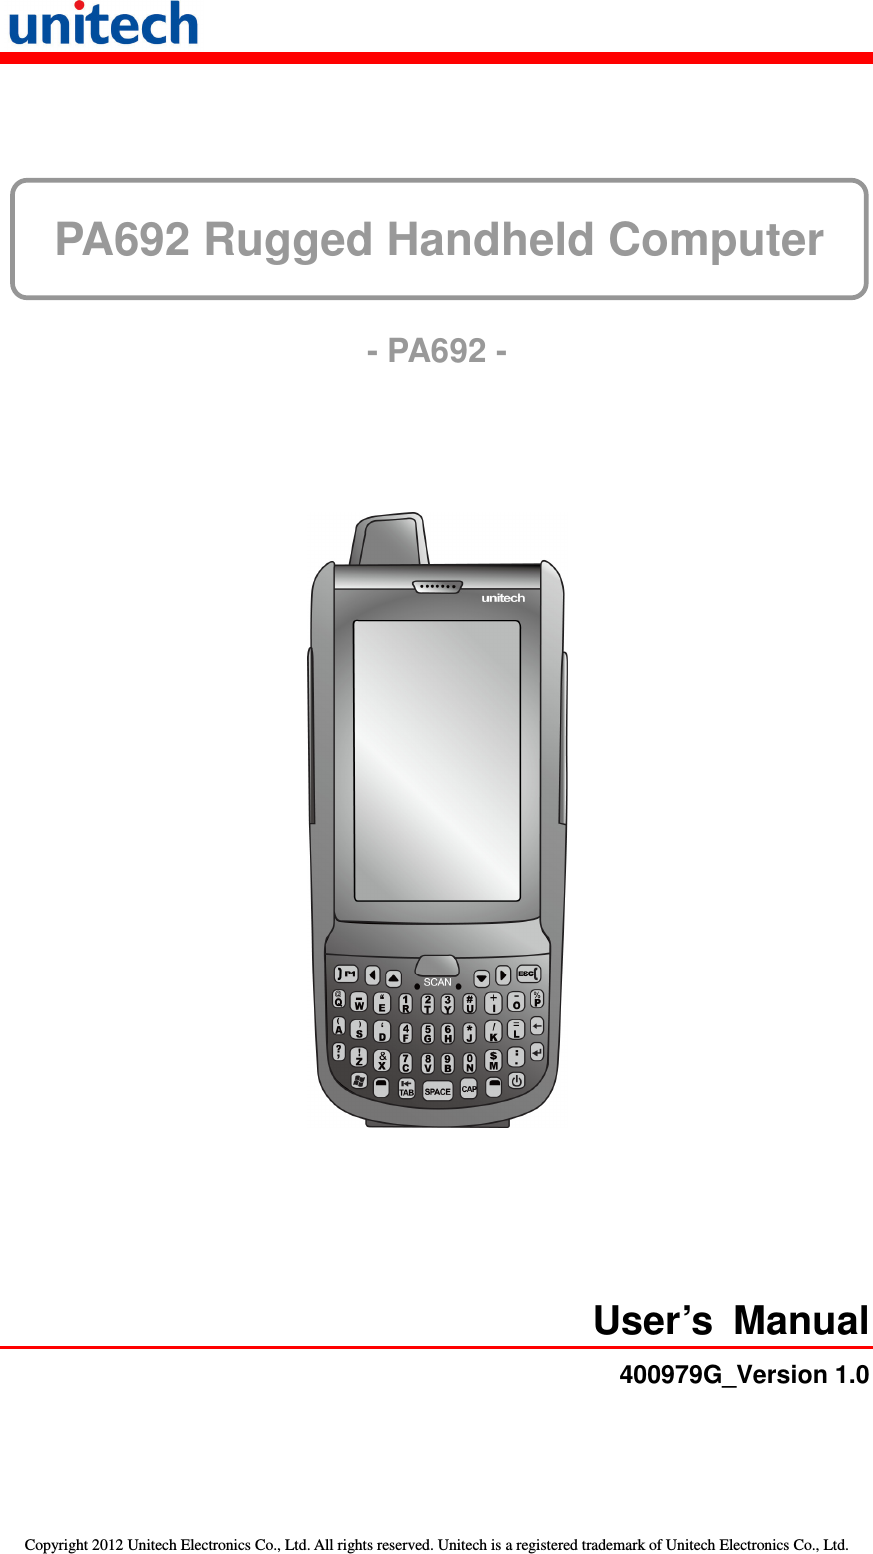   Copyright 2012 Unitech Electronics Co., Ltd. All rights reserved. Unitech is a registered trademark of Unitech Electronics Co., Ltd. PA692 Rugged Handheld Computer       - PA692 -   User’s  Manual 400979G_Version 1.0 